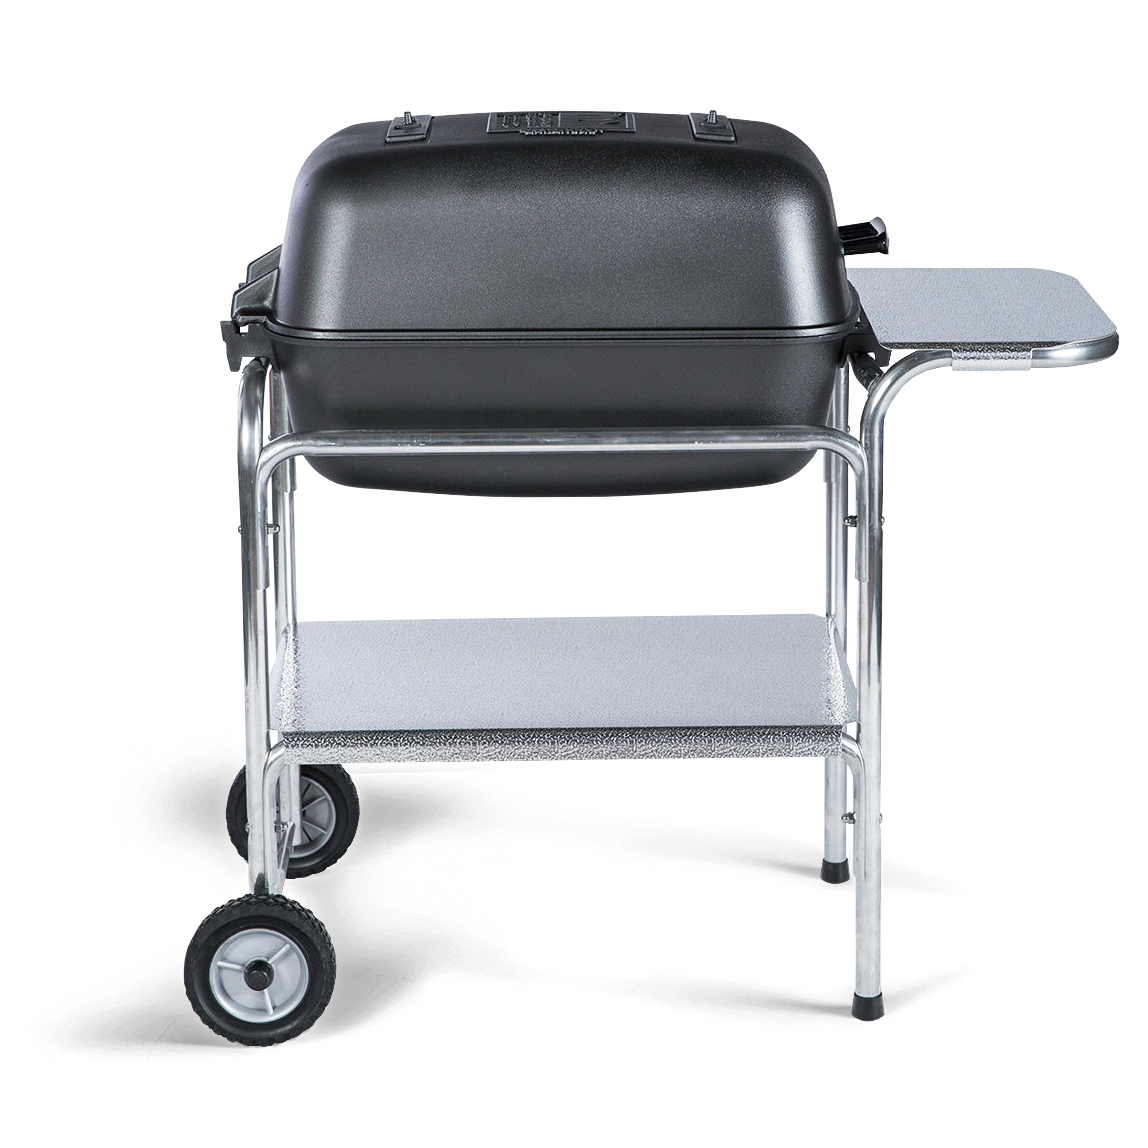 PK Portable Kitchen Charcoal Grill and Smoker - Graphite